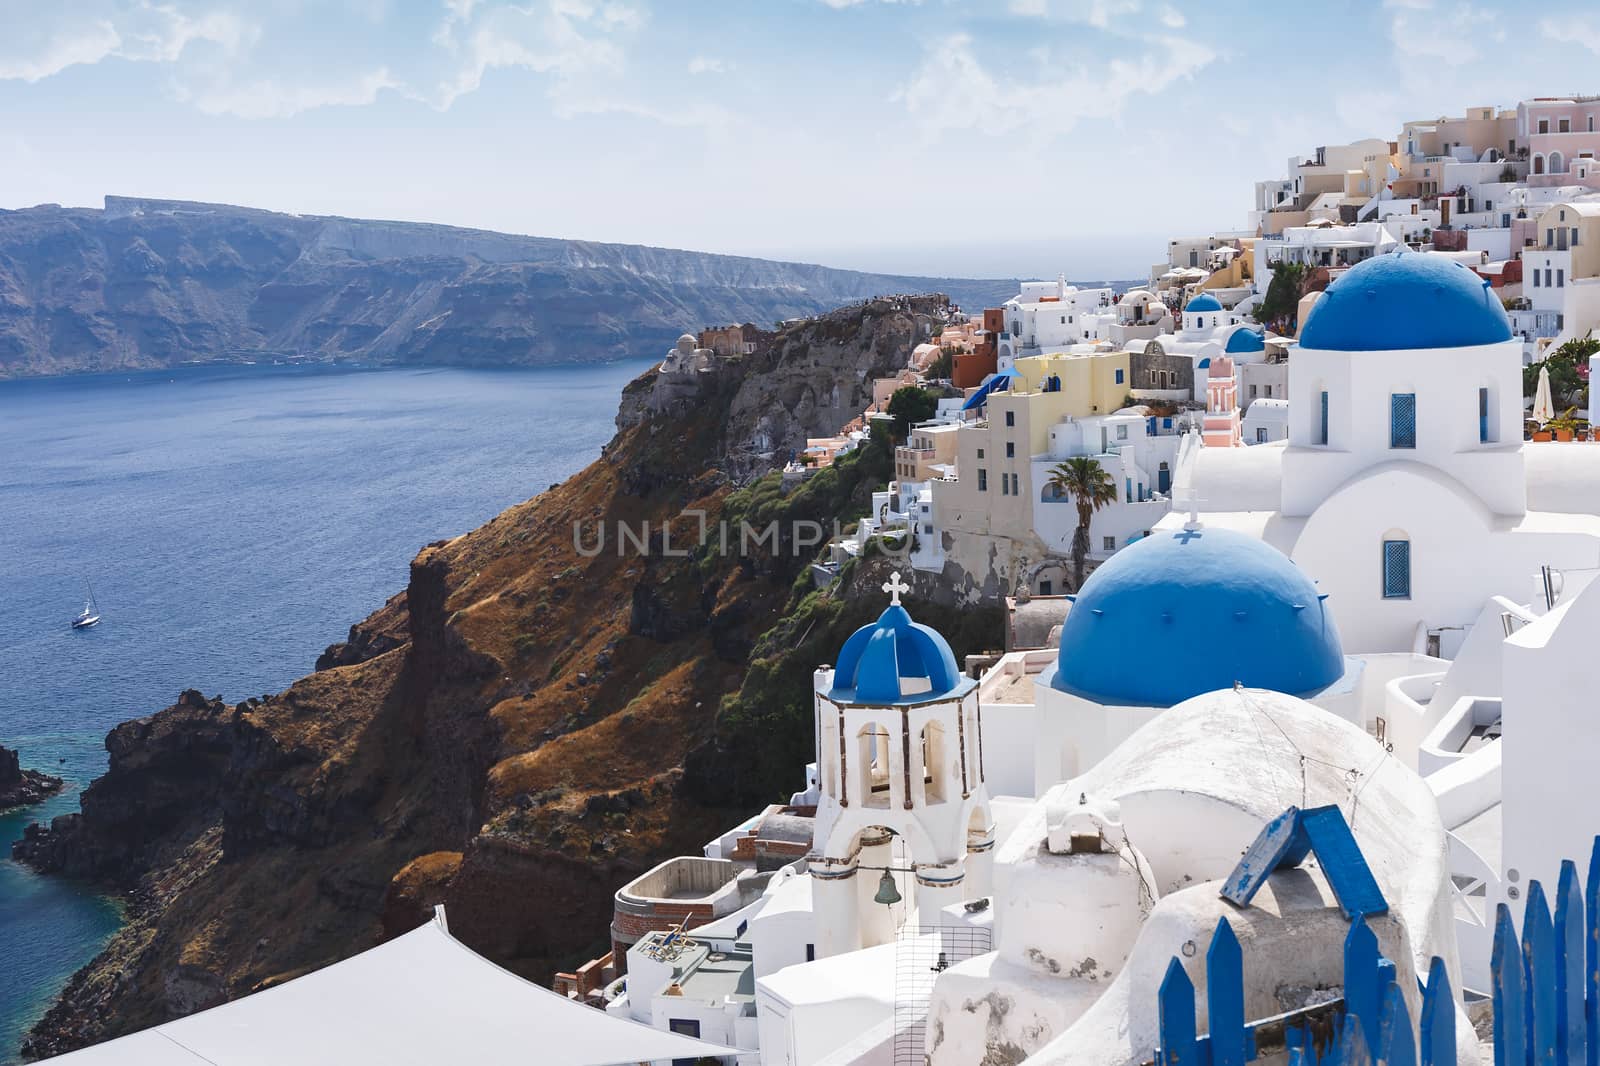 Blue domes and bell tower of churches in Oia, Santorini, Greece.  The edge of the caldera with the blue domes of churches in the foreground, selective focus by Slast20